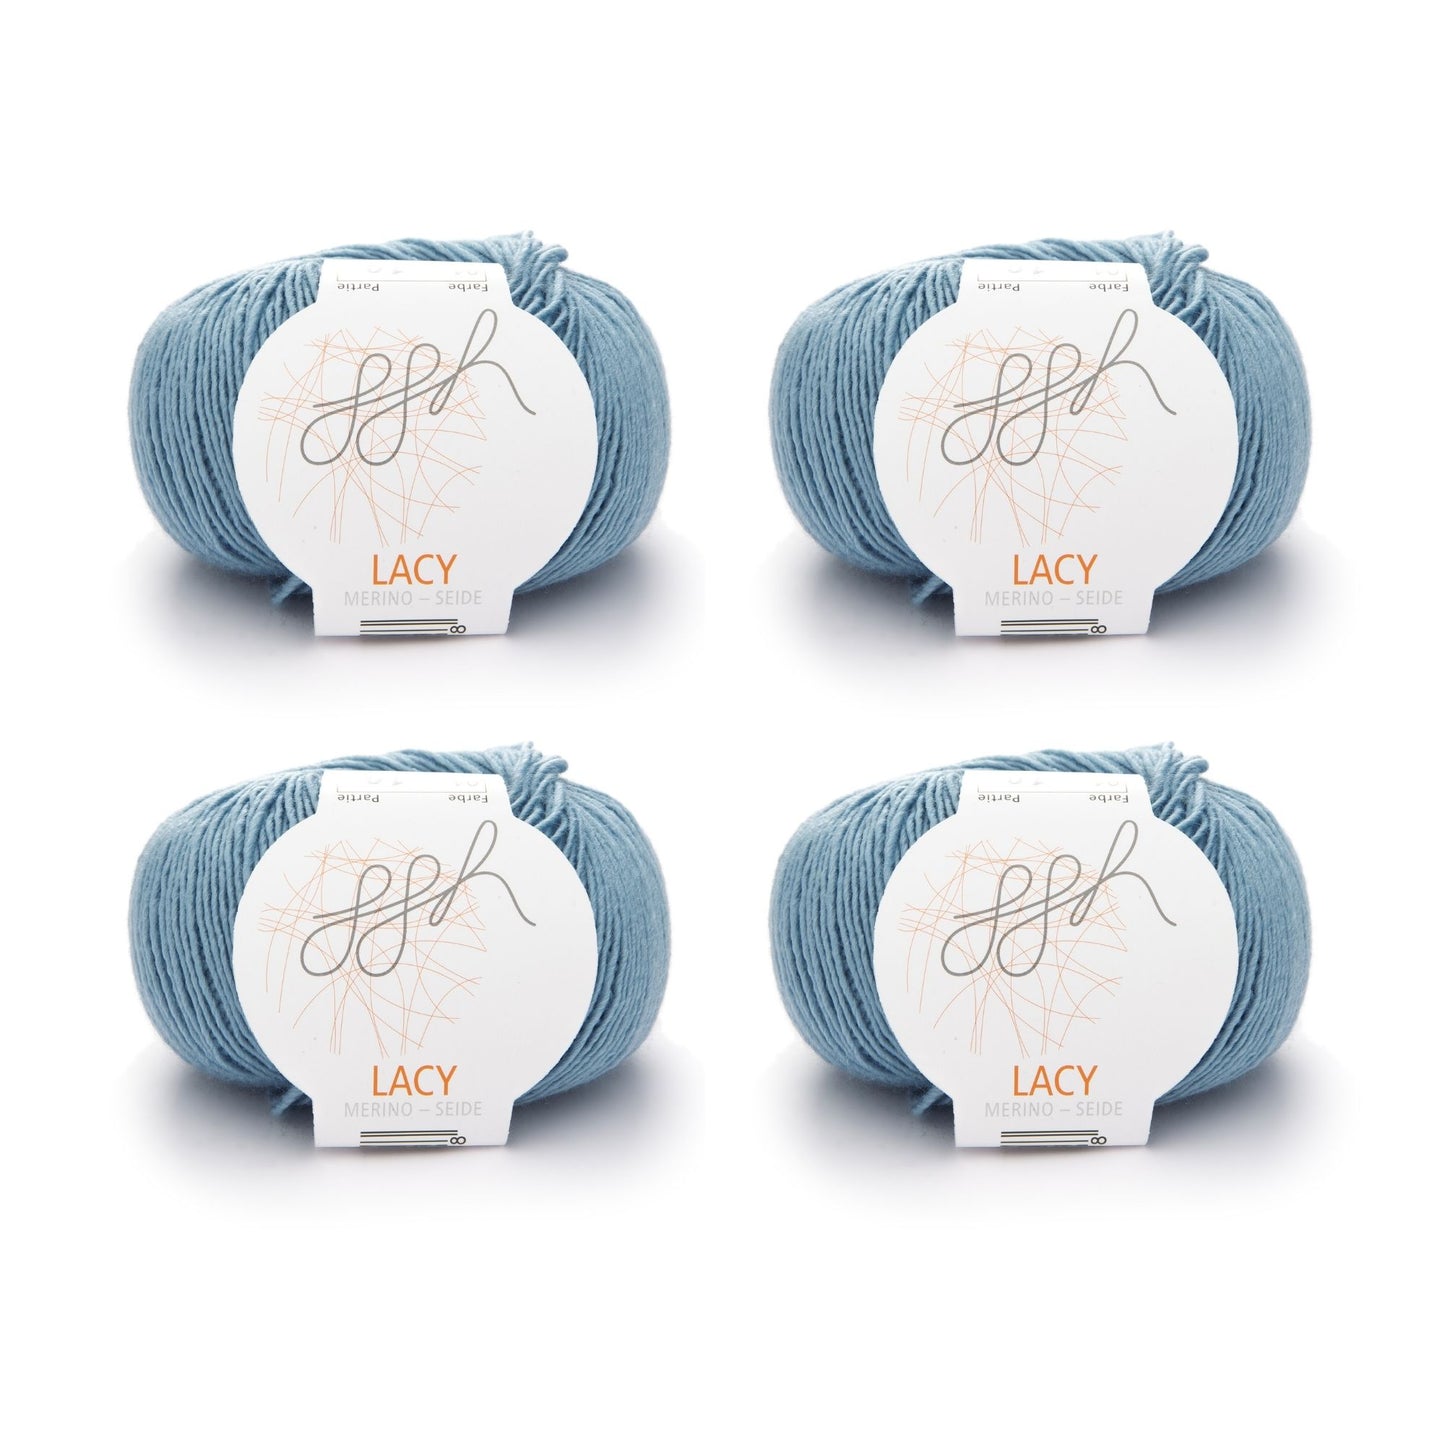 ggh Lacy | Set of 4 x 25g (total 100g) - 004 - Ice Blue